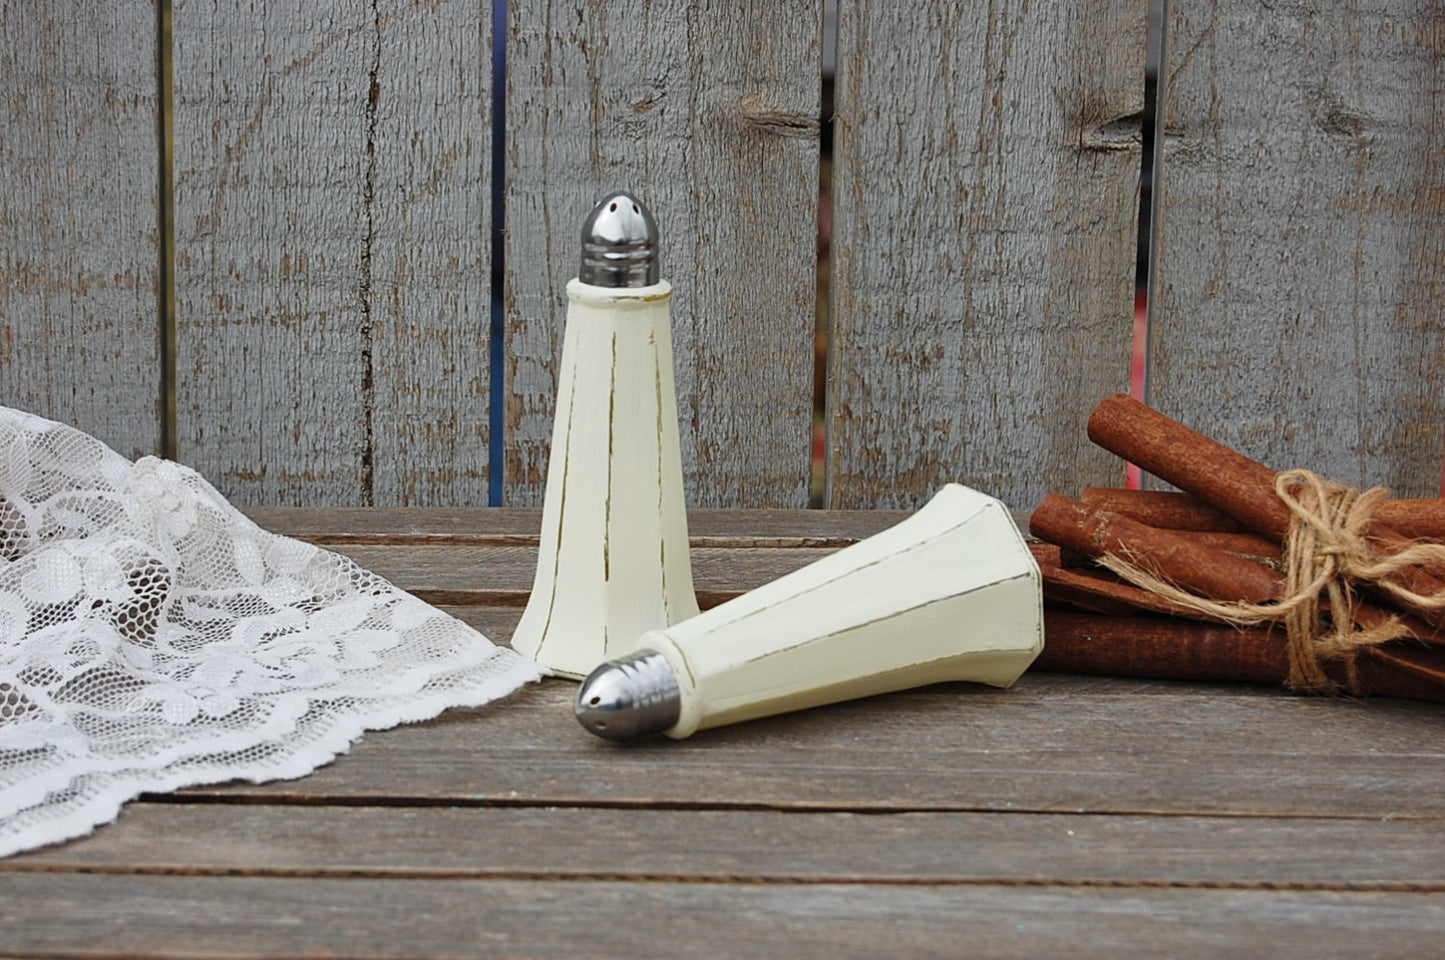 Ivory tower salt and pepper shakers - The Vintage Artistry